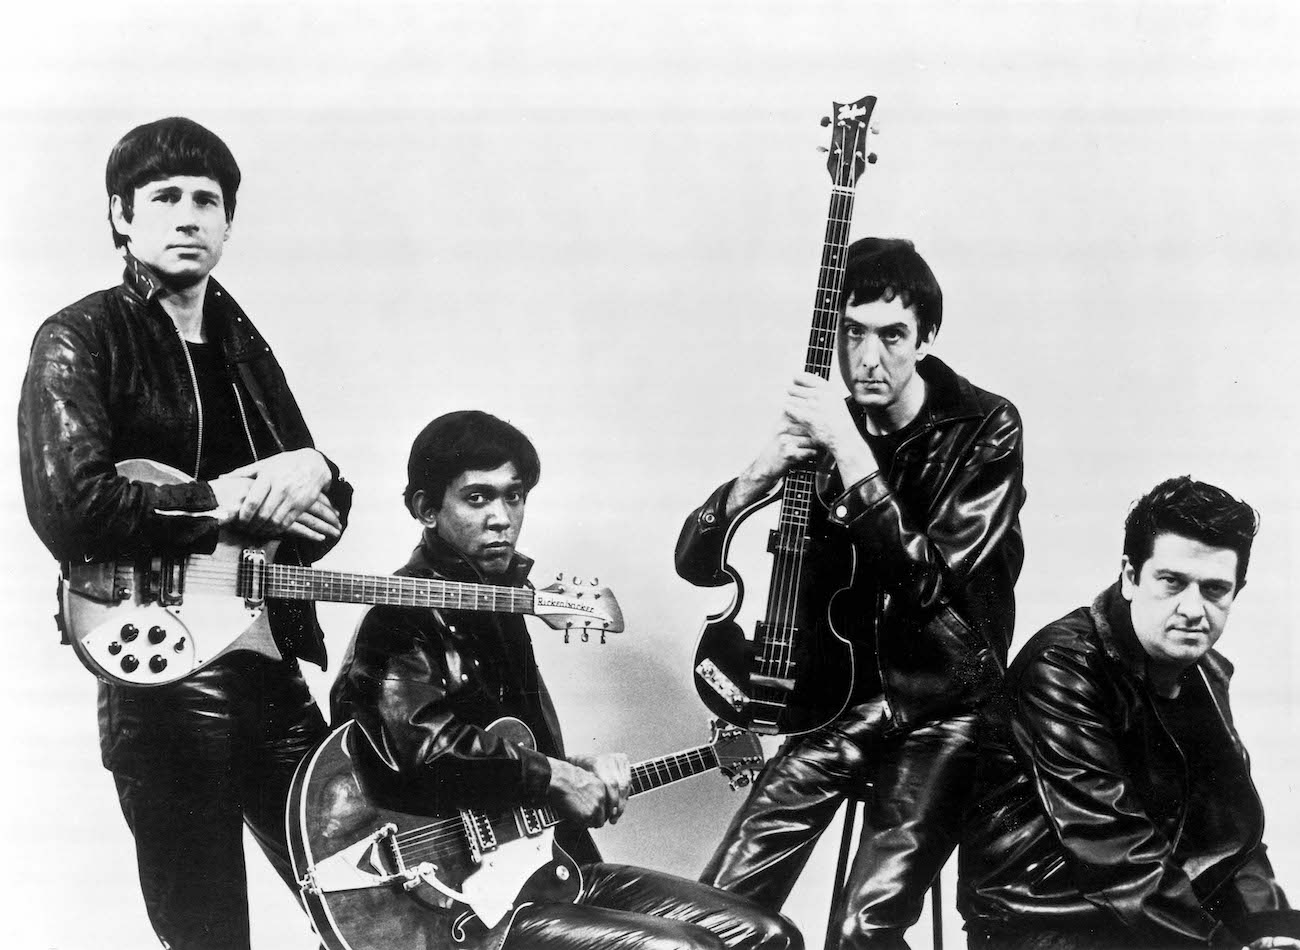 The Rutles posing in leather jackets in 1978.